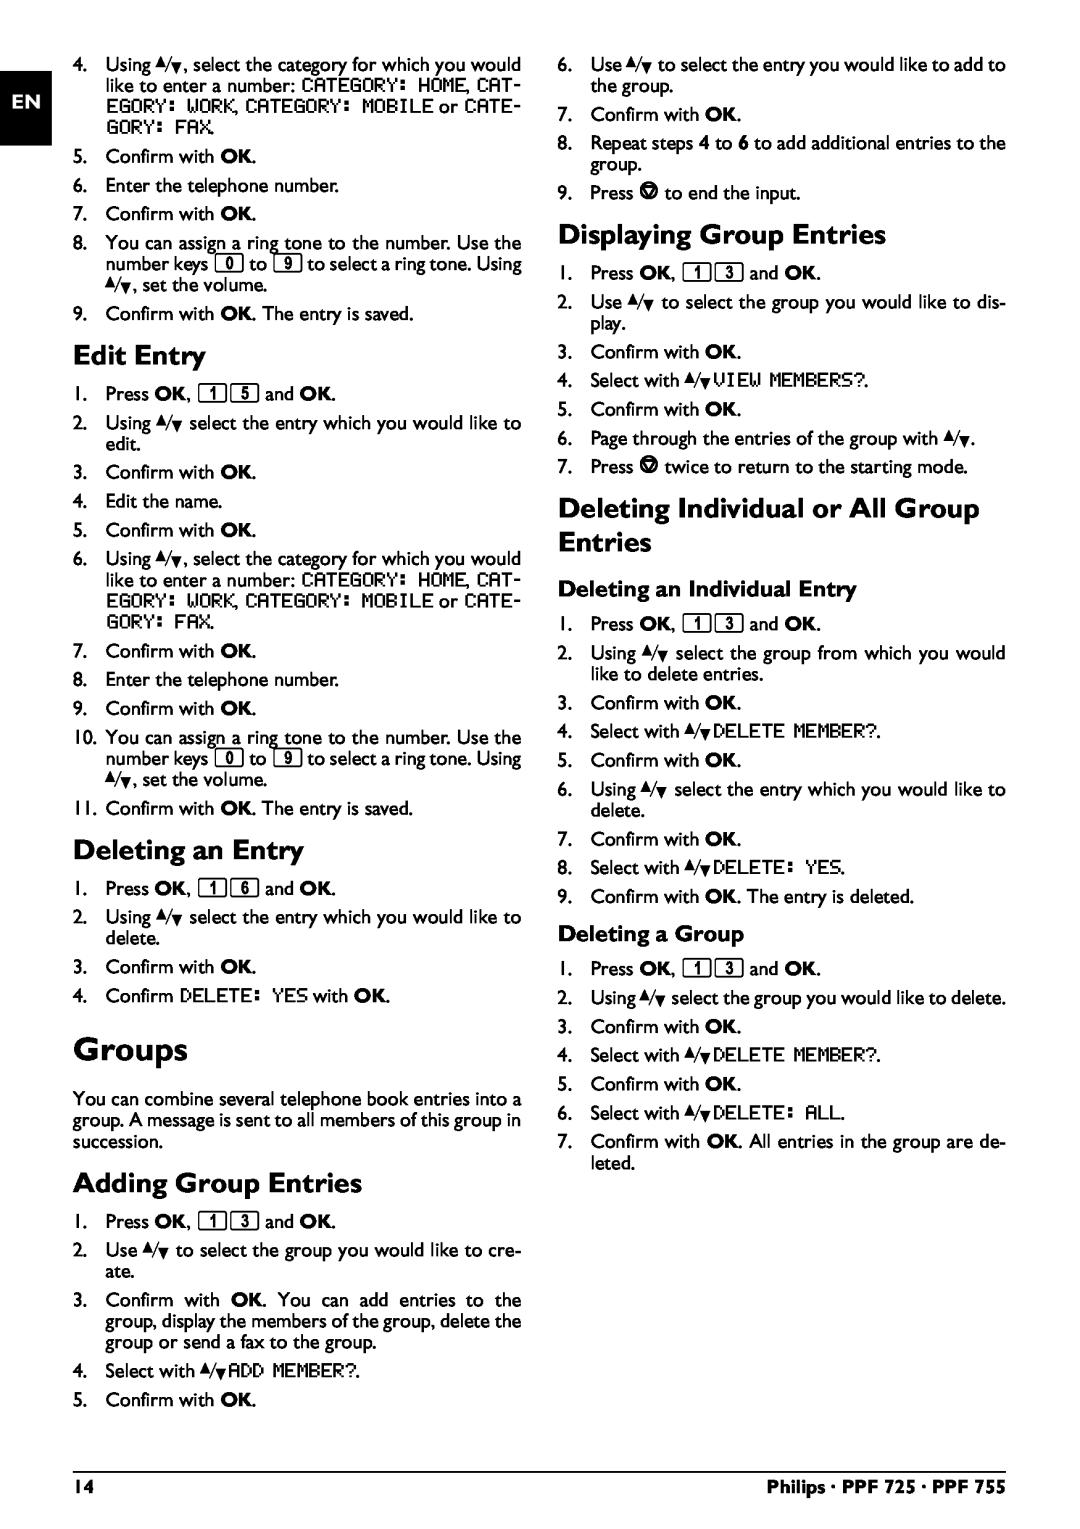 Philips PPF 755, PPF 725 user manual Groups, Edit Entry, Deleting an Entry, Adding Group Entries, Displaying Group Entries 